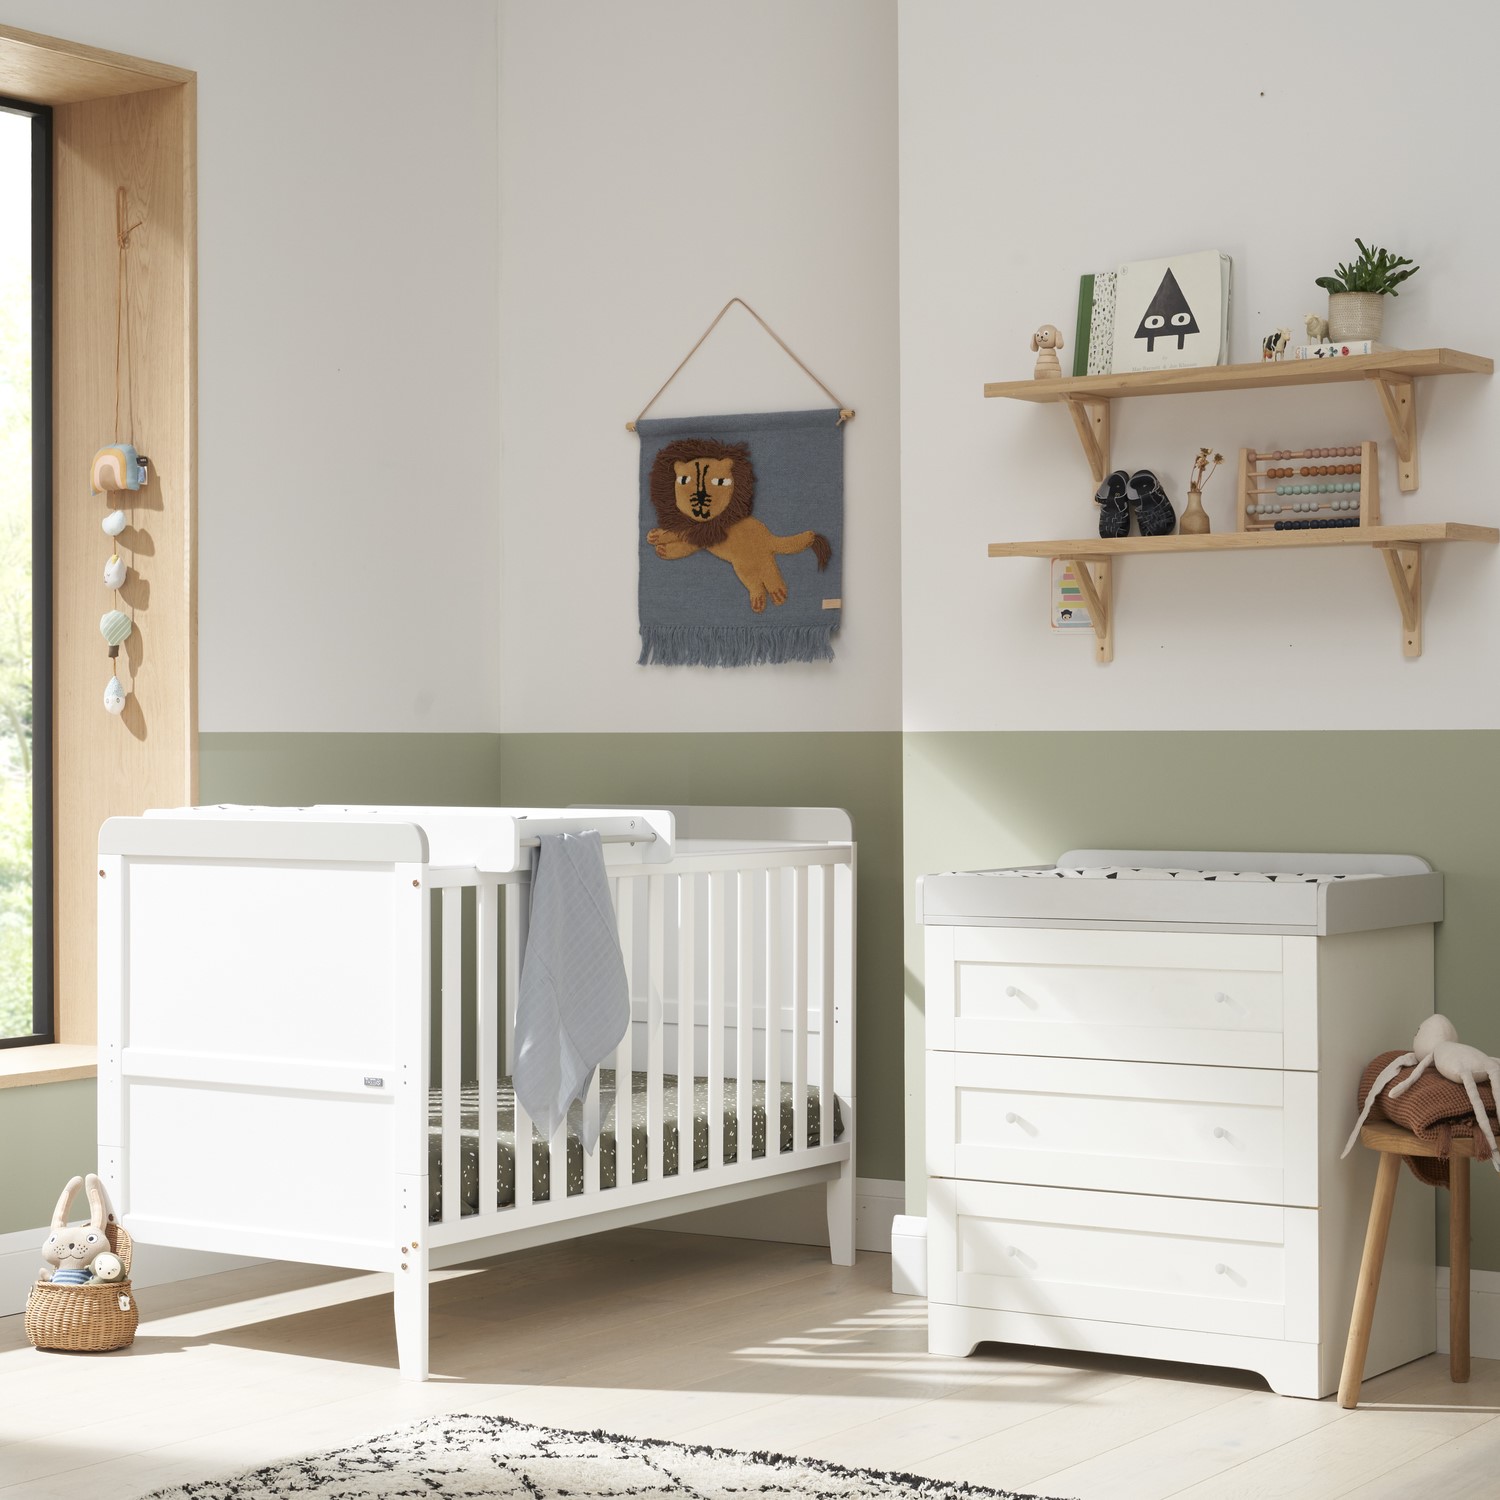 Photo of 2 piece nursery furniture set with cot bed and changing table in white and grey - rio - tutti bambini